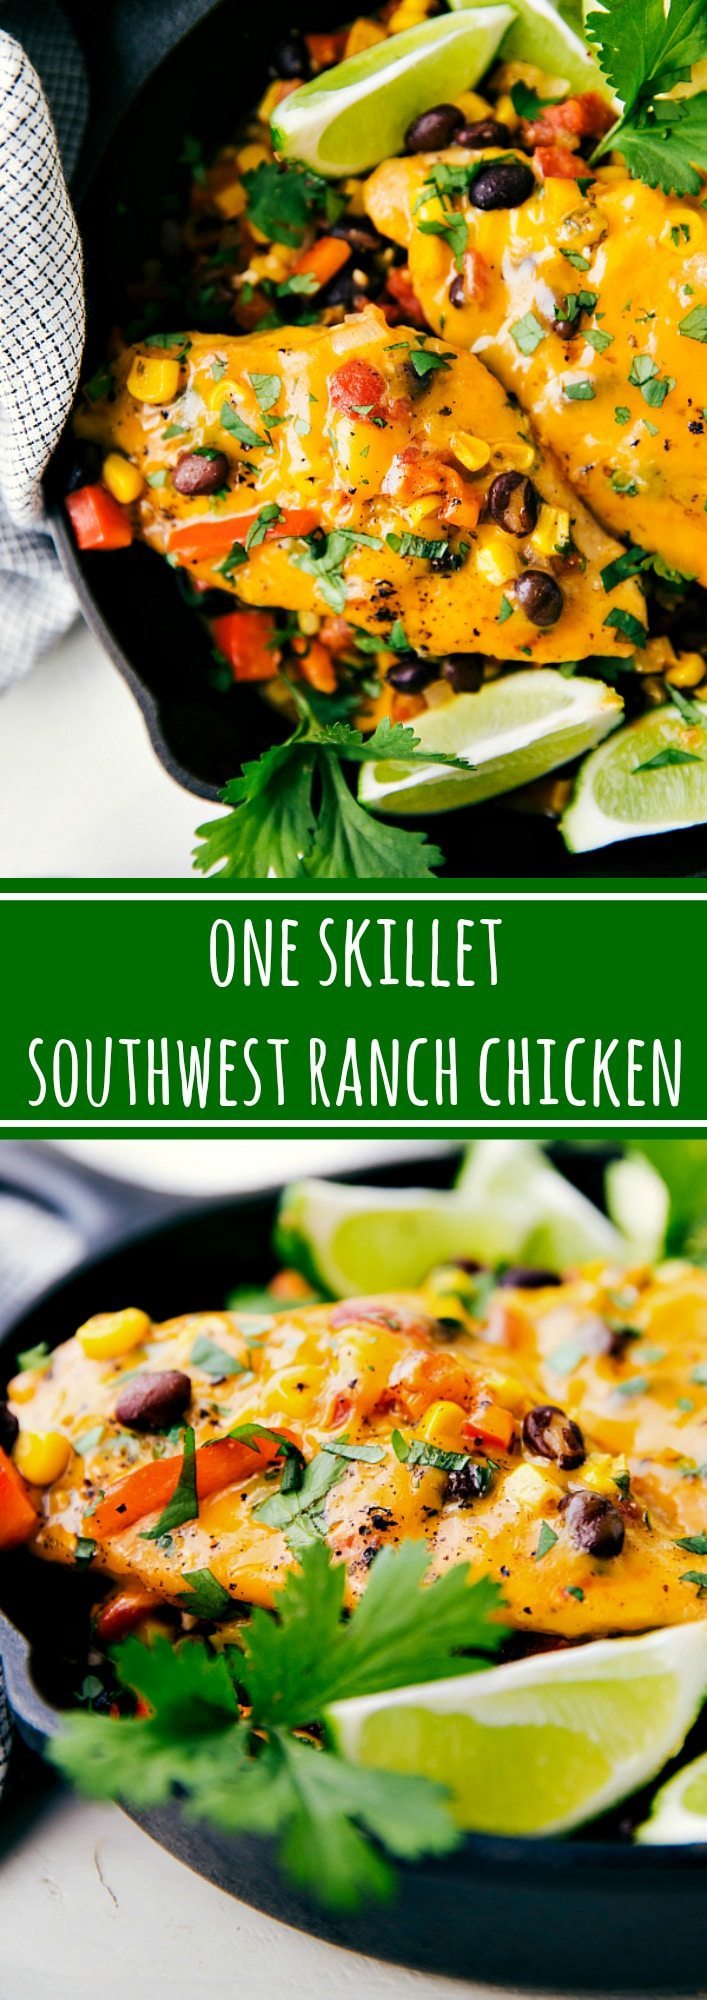 The BEST One Skillet Southwest Ranch Cheddar Chicken. Easy, 30-minute meal!